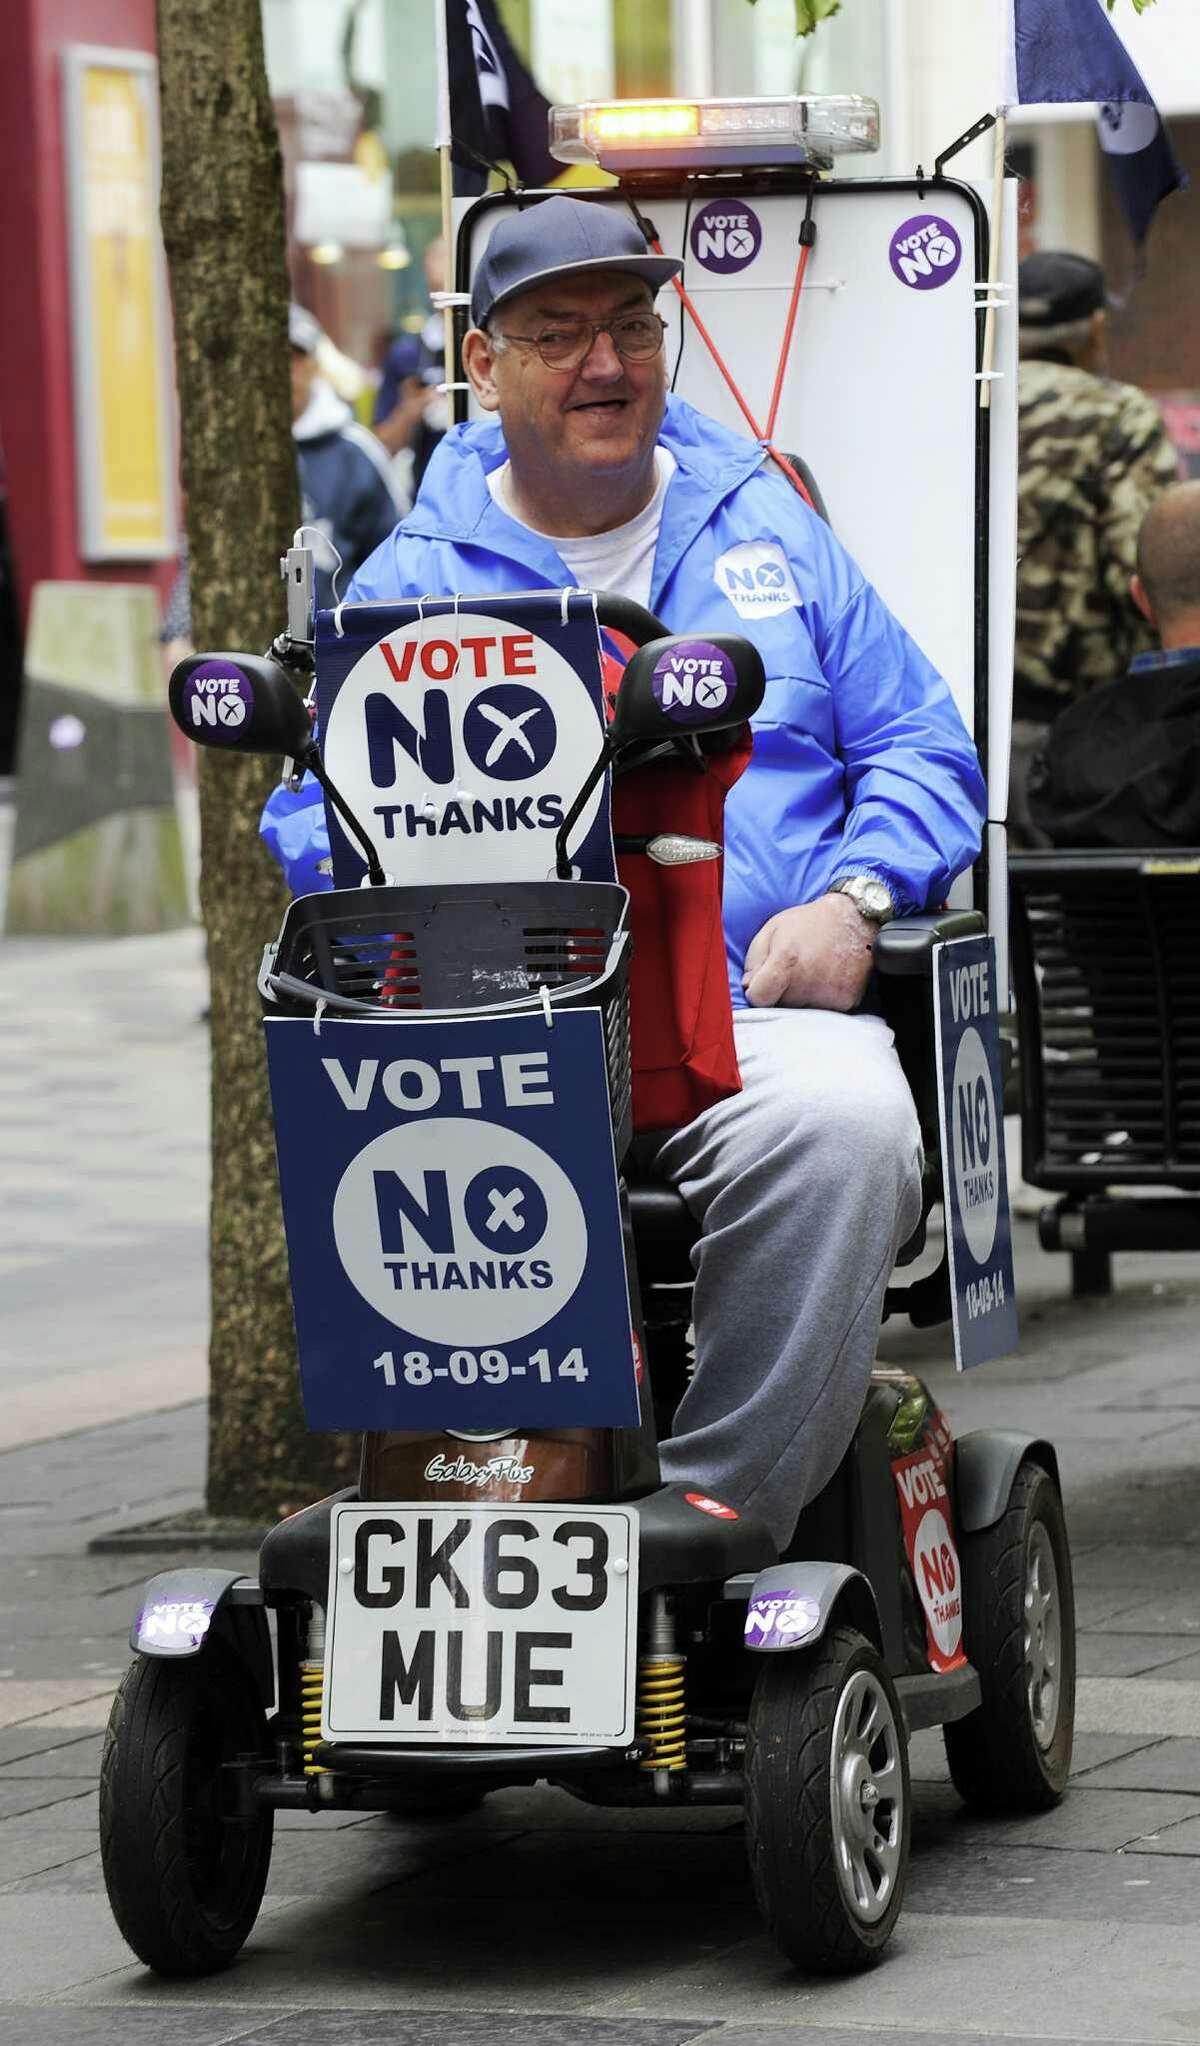 A Pro-union "No" campaign supporter rides his mobility scooter adorned with campaign placards in Glasgow on September 15, 2014, ahead of the Scottish independence referendum. The "Yes" and "No" camps are racing to win over undecided voters ahead of the historic poll on Scottish independence on September 18, 2014, with top bands playing a gig urging a vote for leaving Britain. AFP PHOTO/ANDY BUCHANANAndy Buchanan/AFP/Getty Images